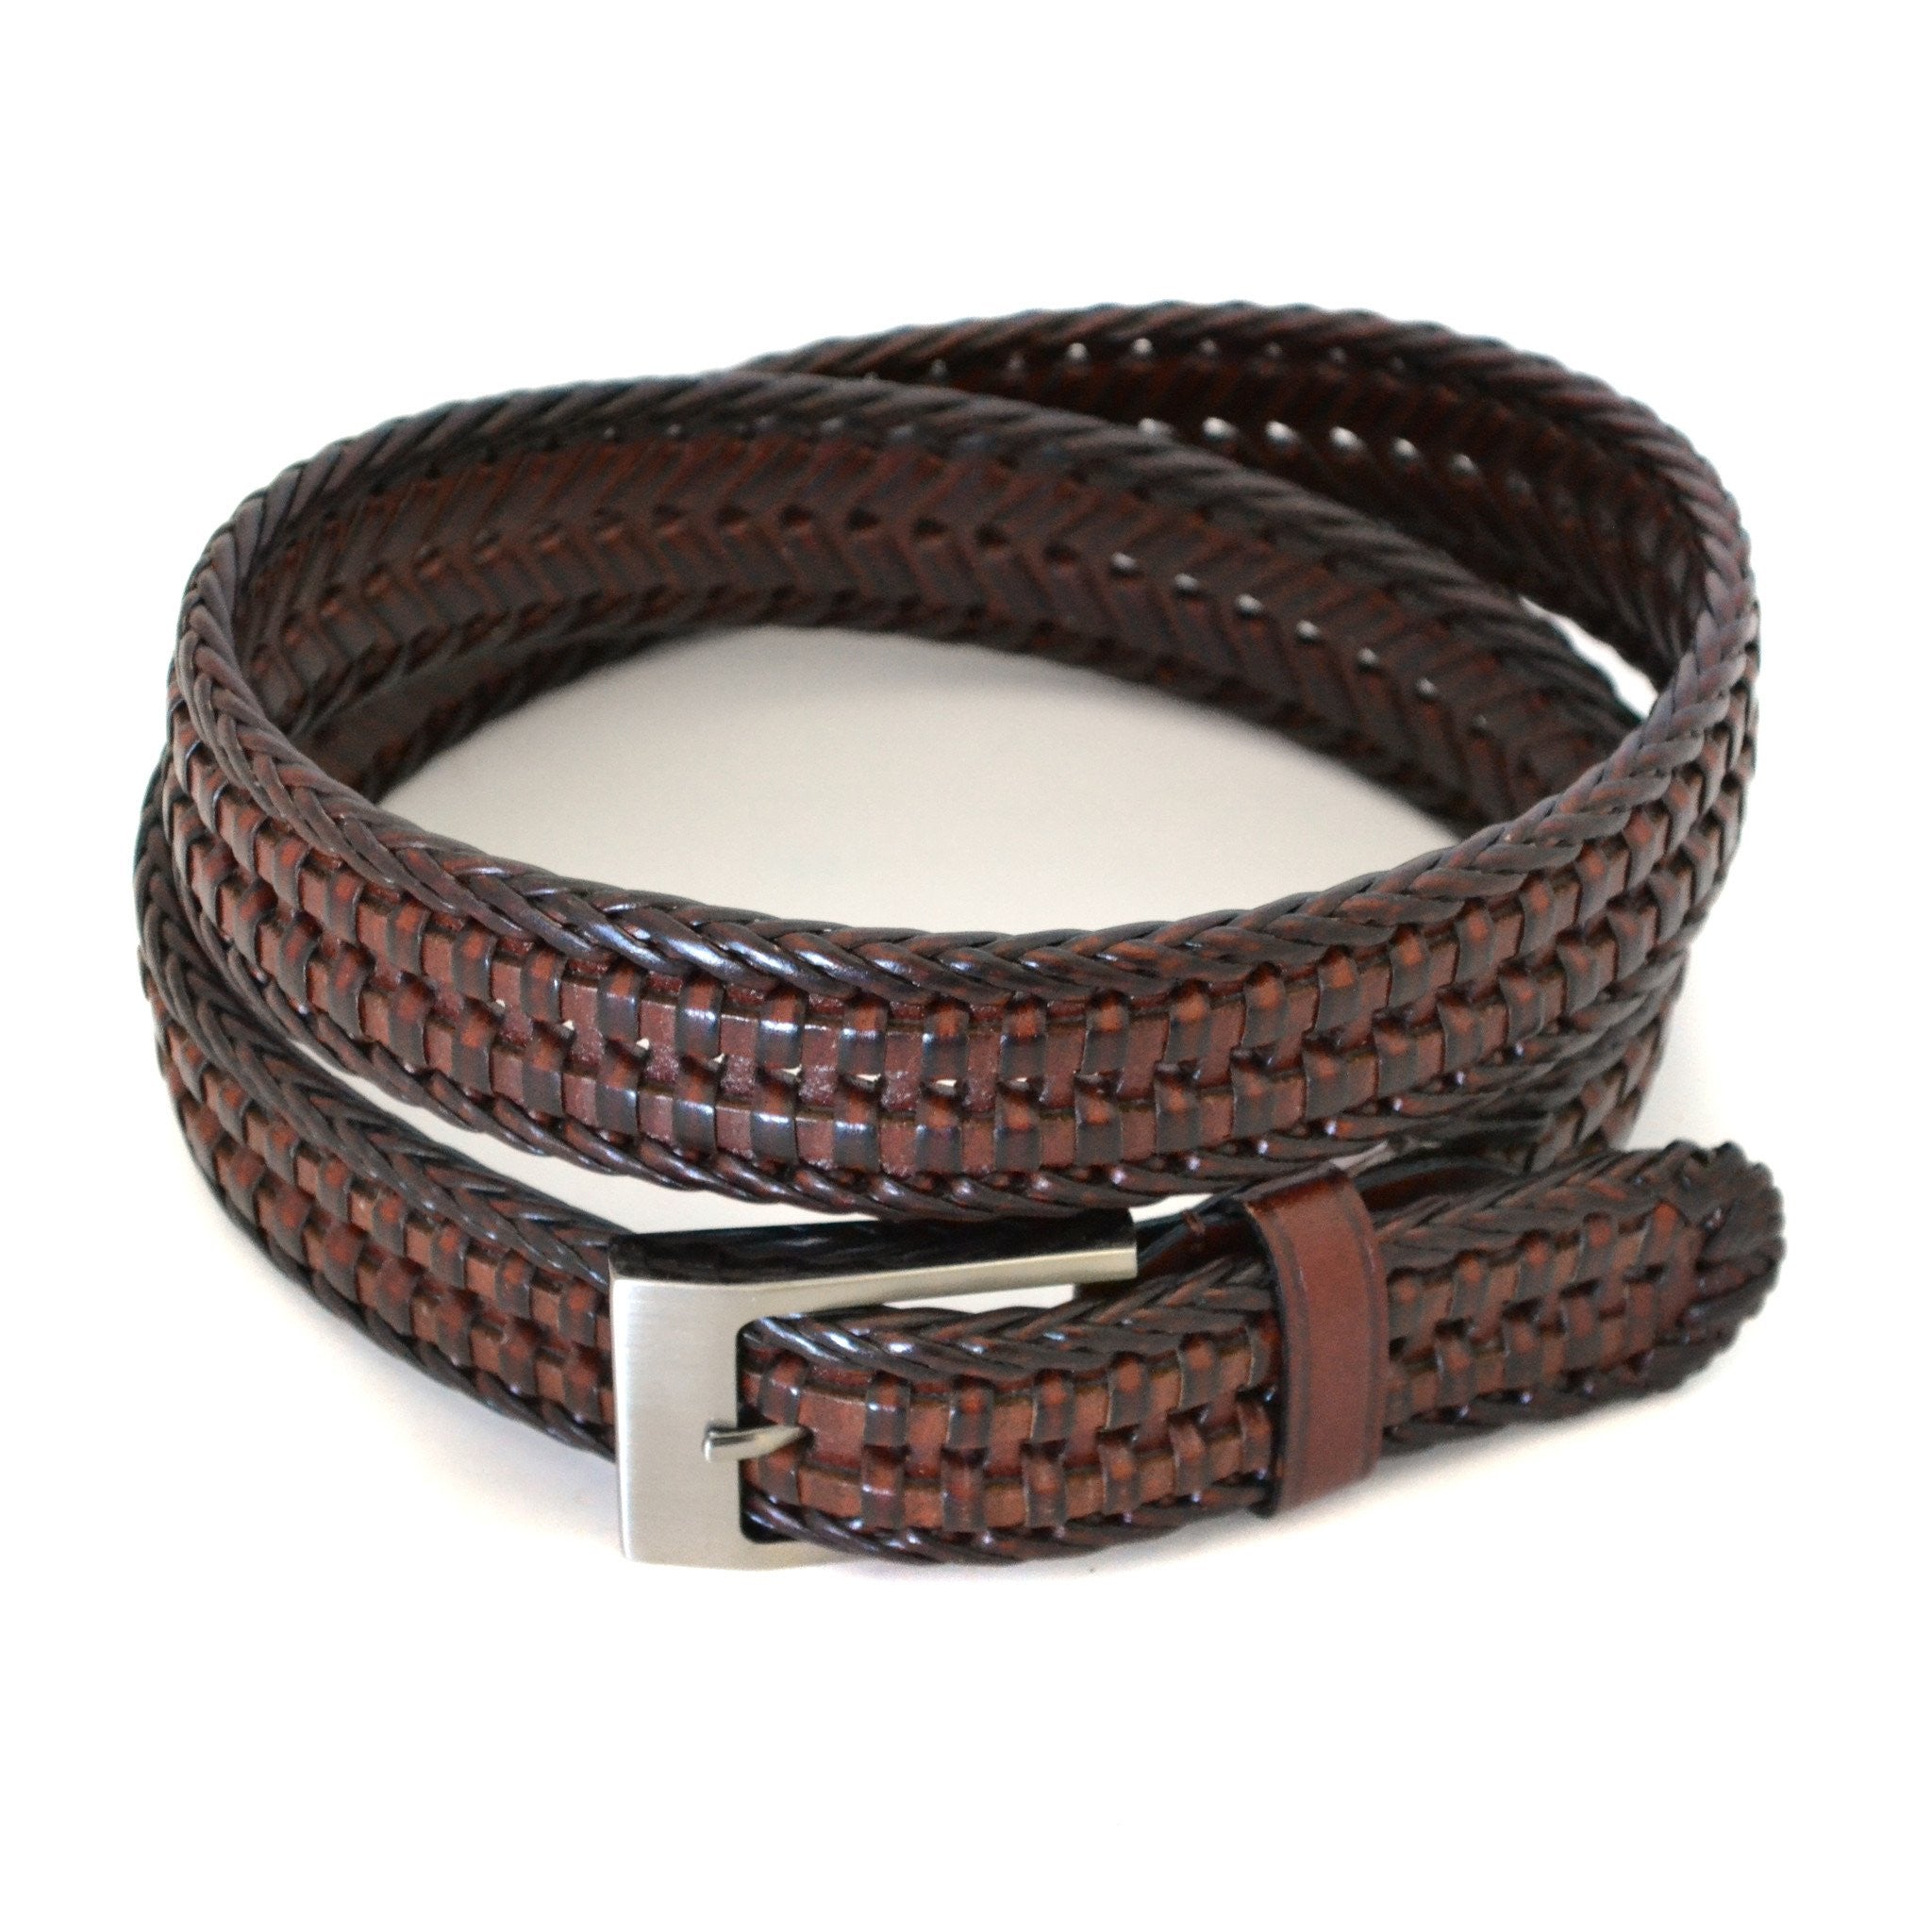 Mens Braided Leather Belt Cowhide Woven Leather Belt for Casual